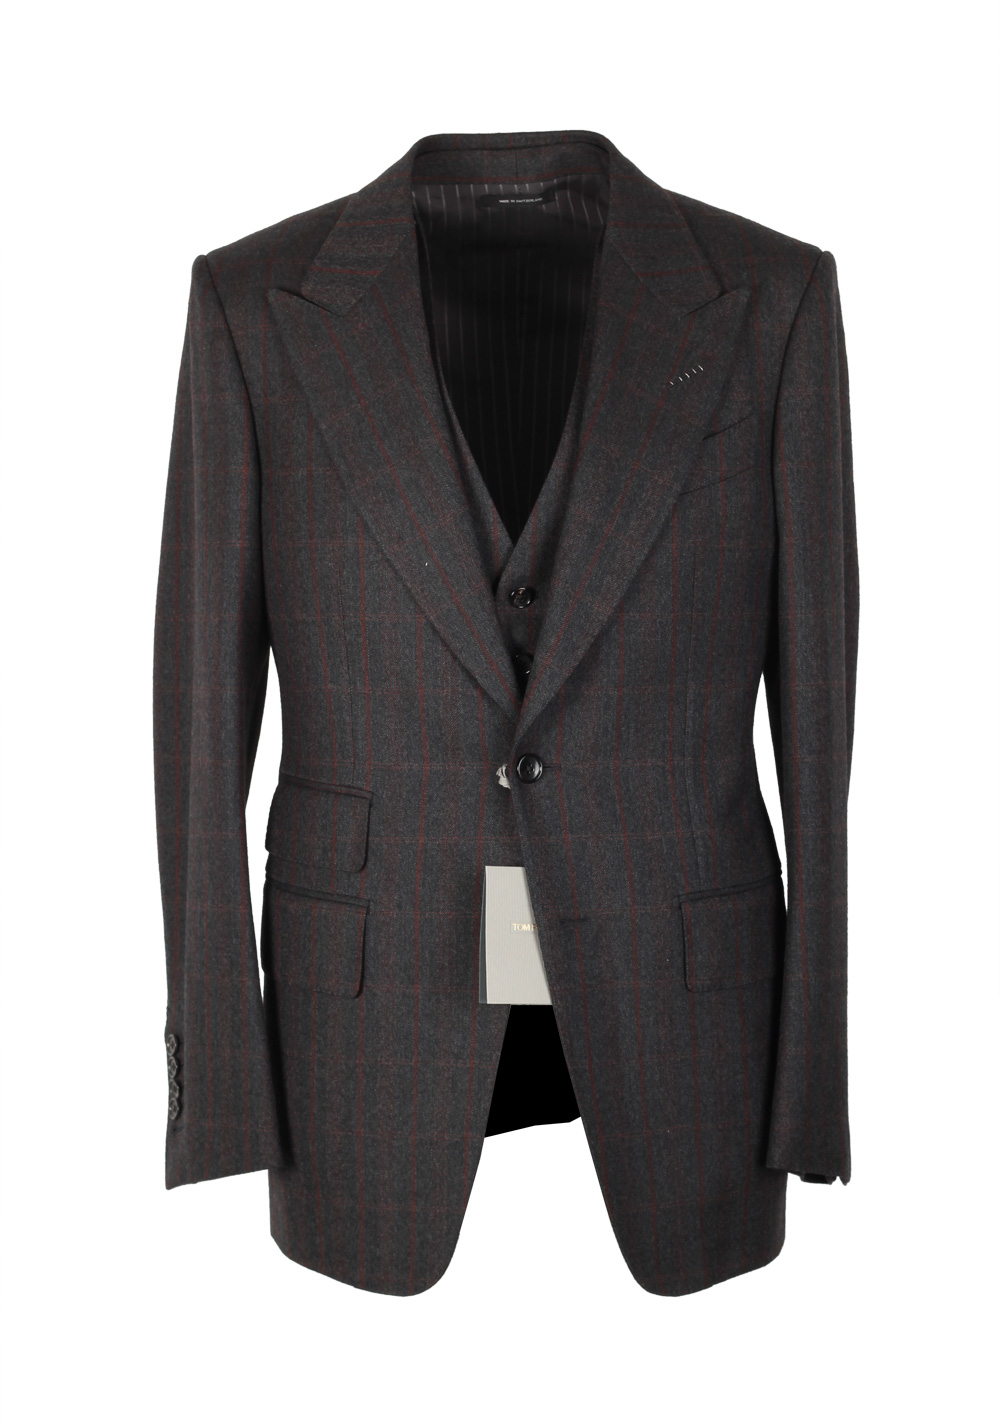 TOM FORD Shelton Gray Checked 3 Piece Suit Size 46 / 36R U.S. Wool | Costume Limité